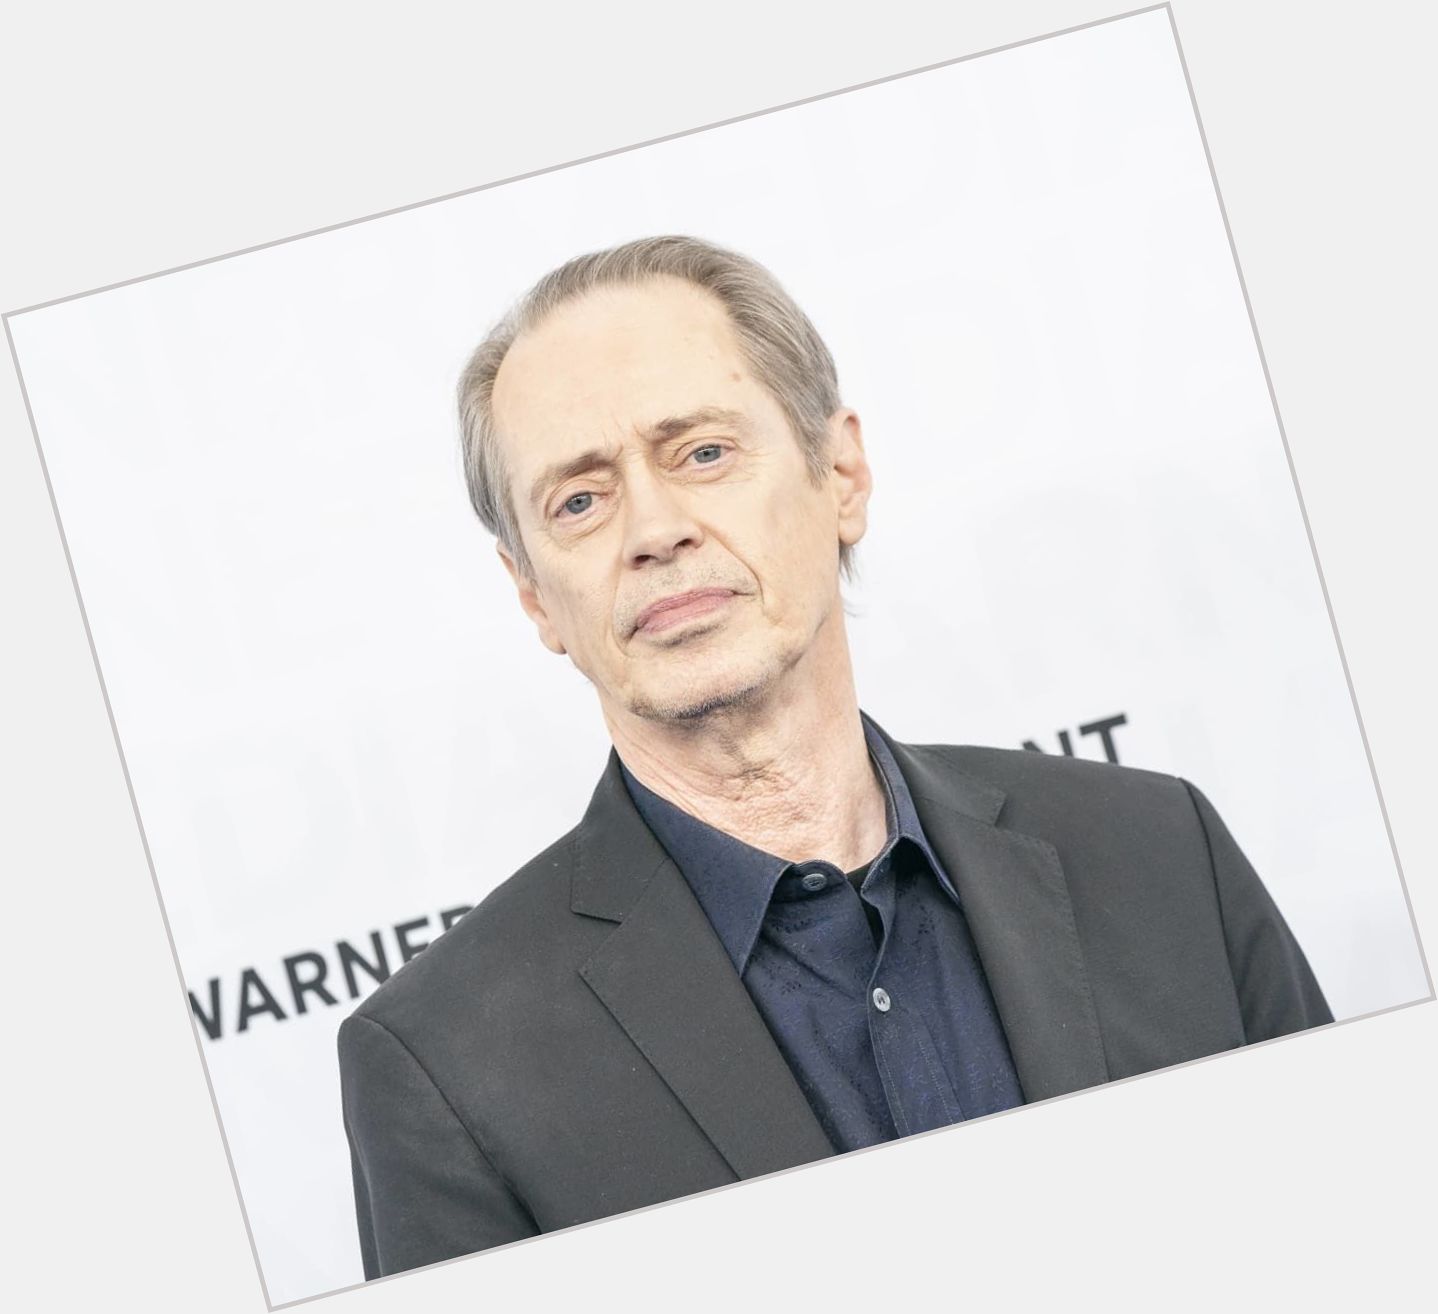 What a man! Happy 63rd birthday to Steve Buscemi!   